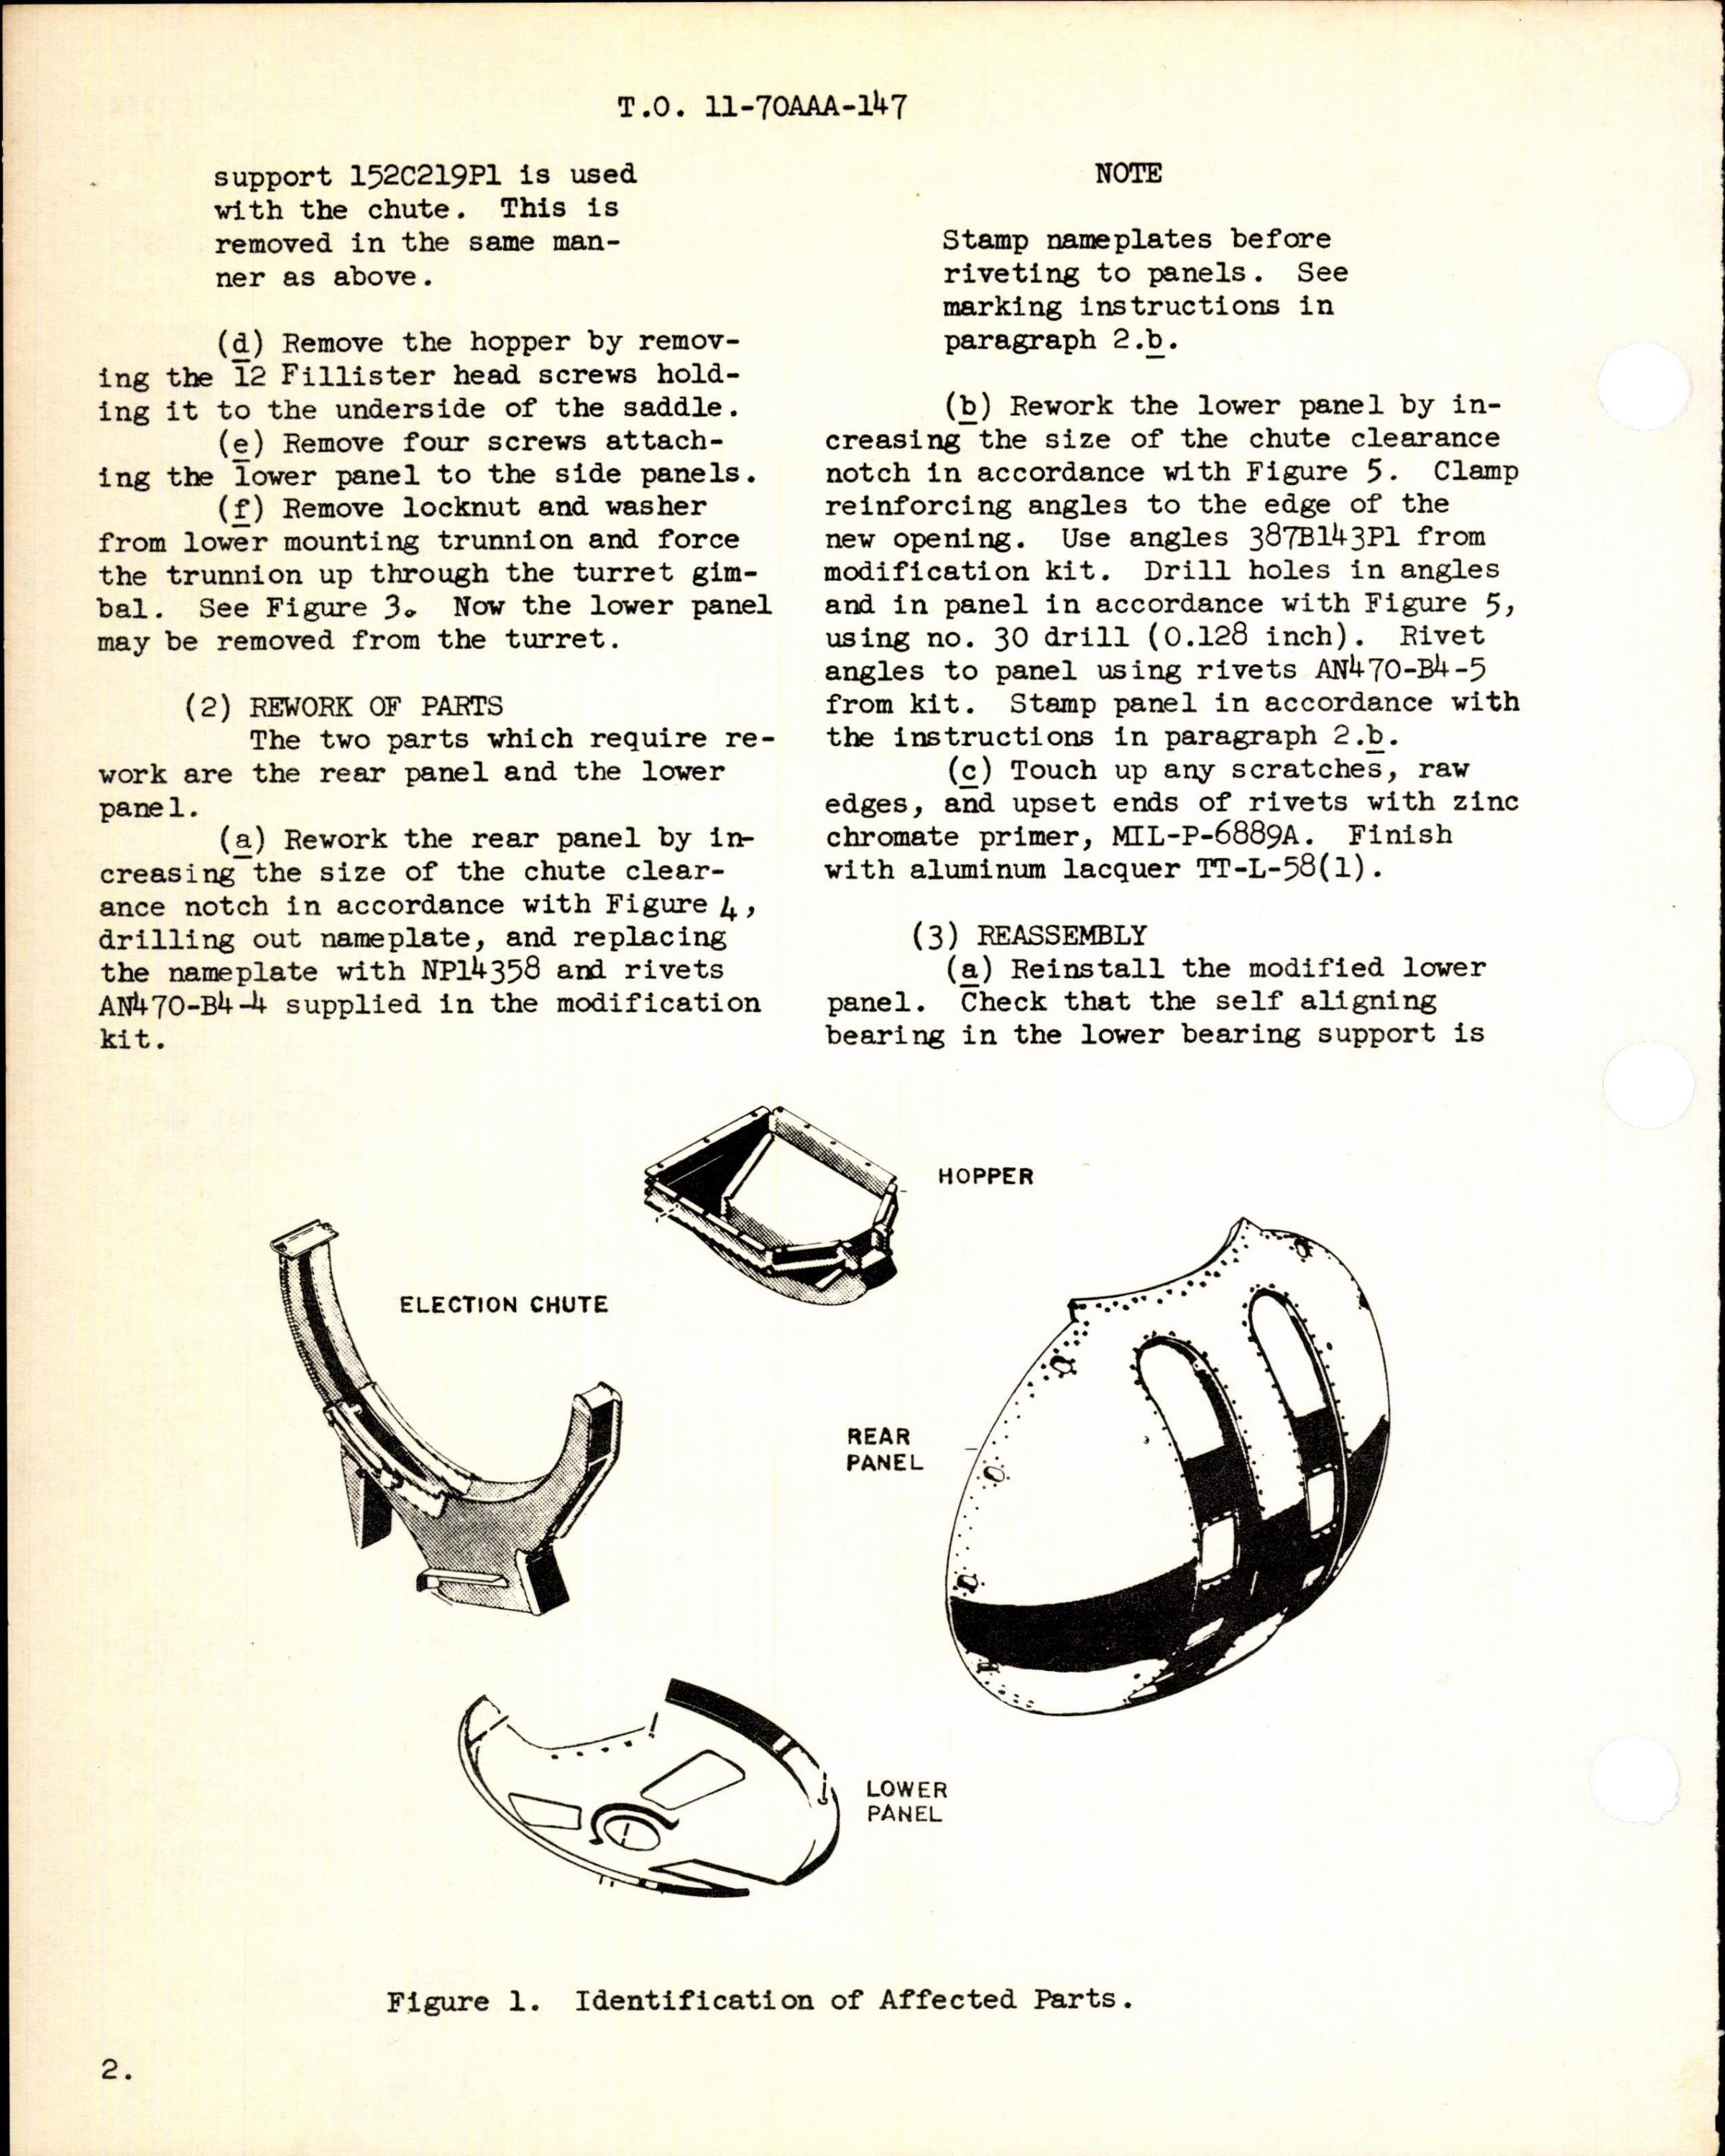 Sample page 2 from AirCorps Library document: Replacement of the Tail Turret Ejection System for the B-36 Fire Control System